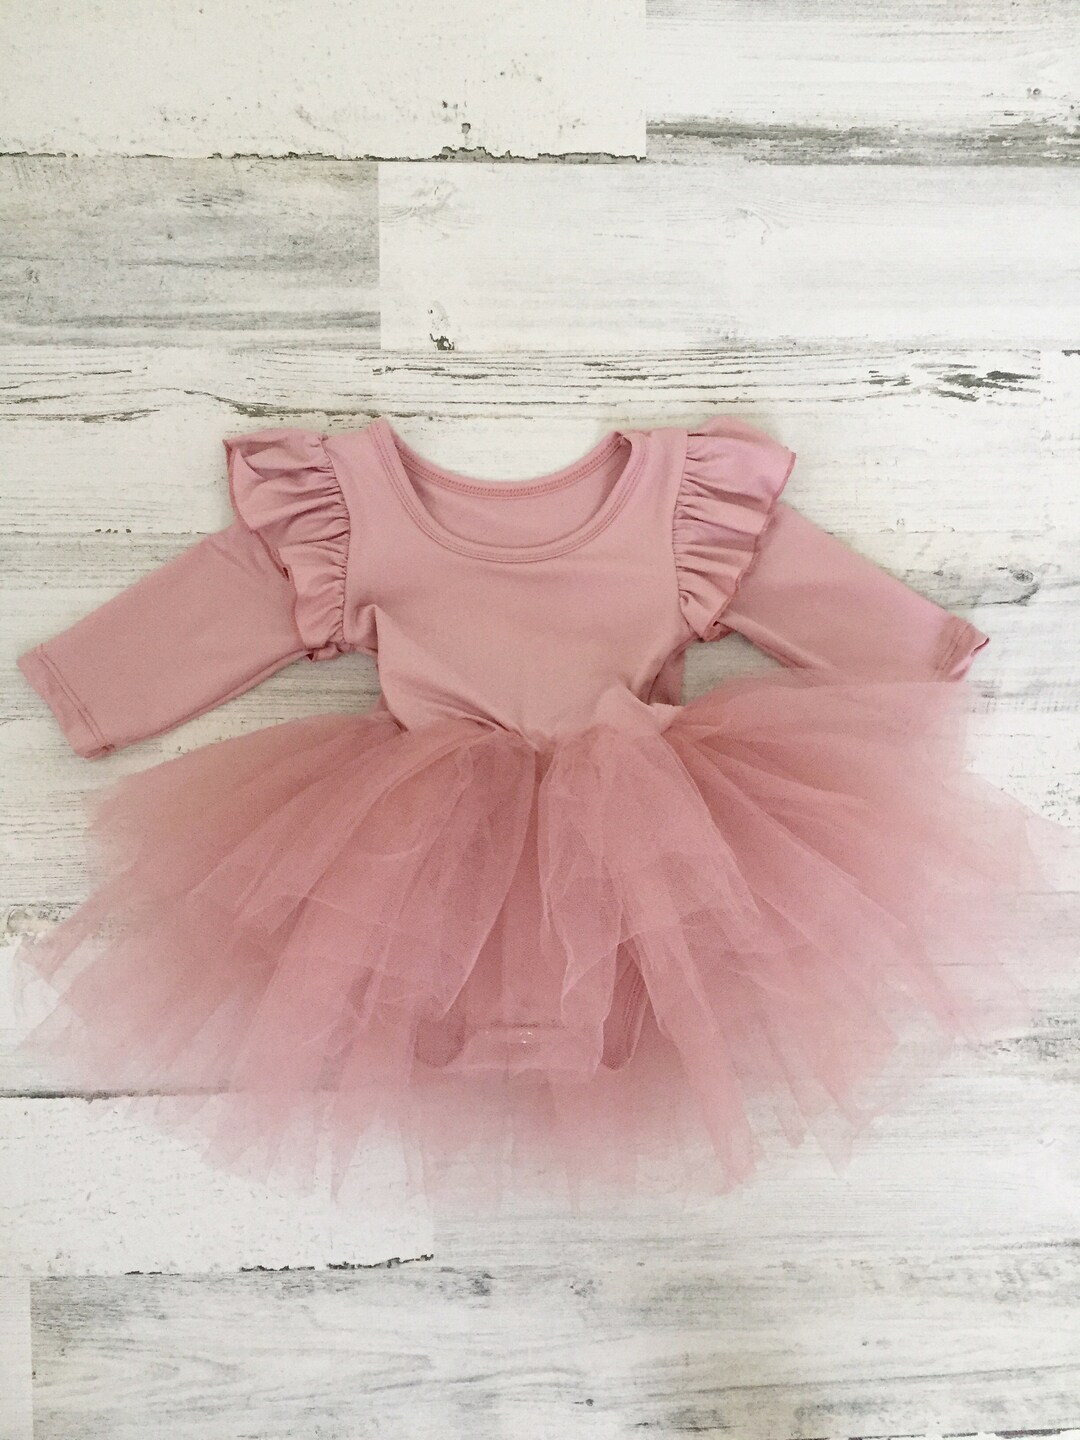 Baby Girls Tutu Dress-thanksgiving Outfit-cake Smash Outfit-vintage Pink  Tutu-baby Girl Dress-holiday Baby Tutu Outfit-baby Girl Clothes 